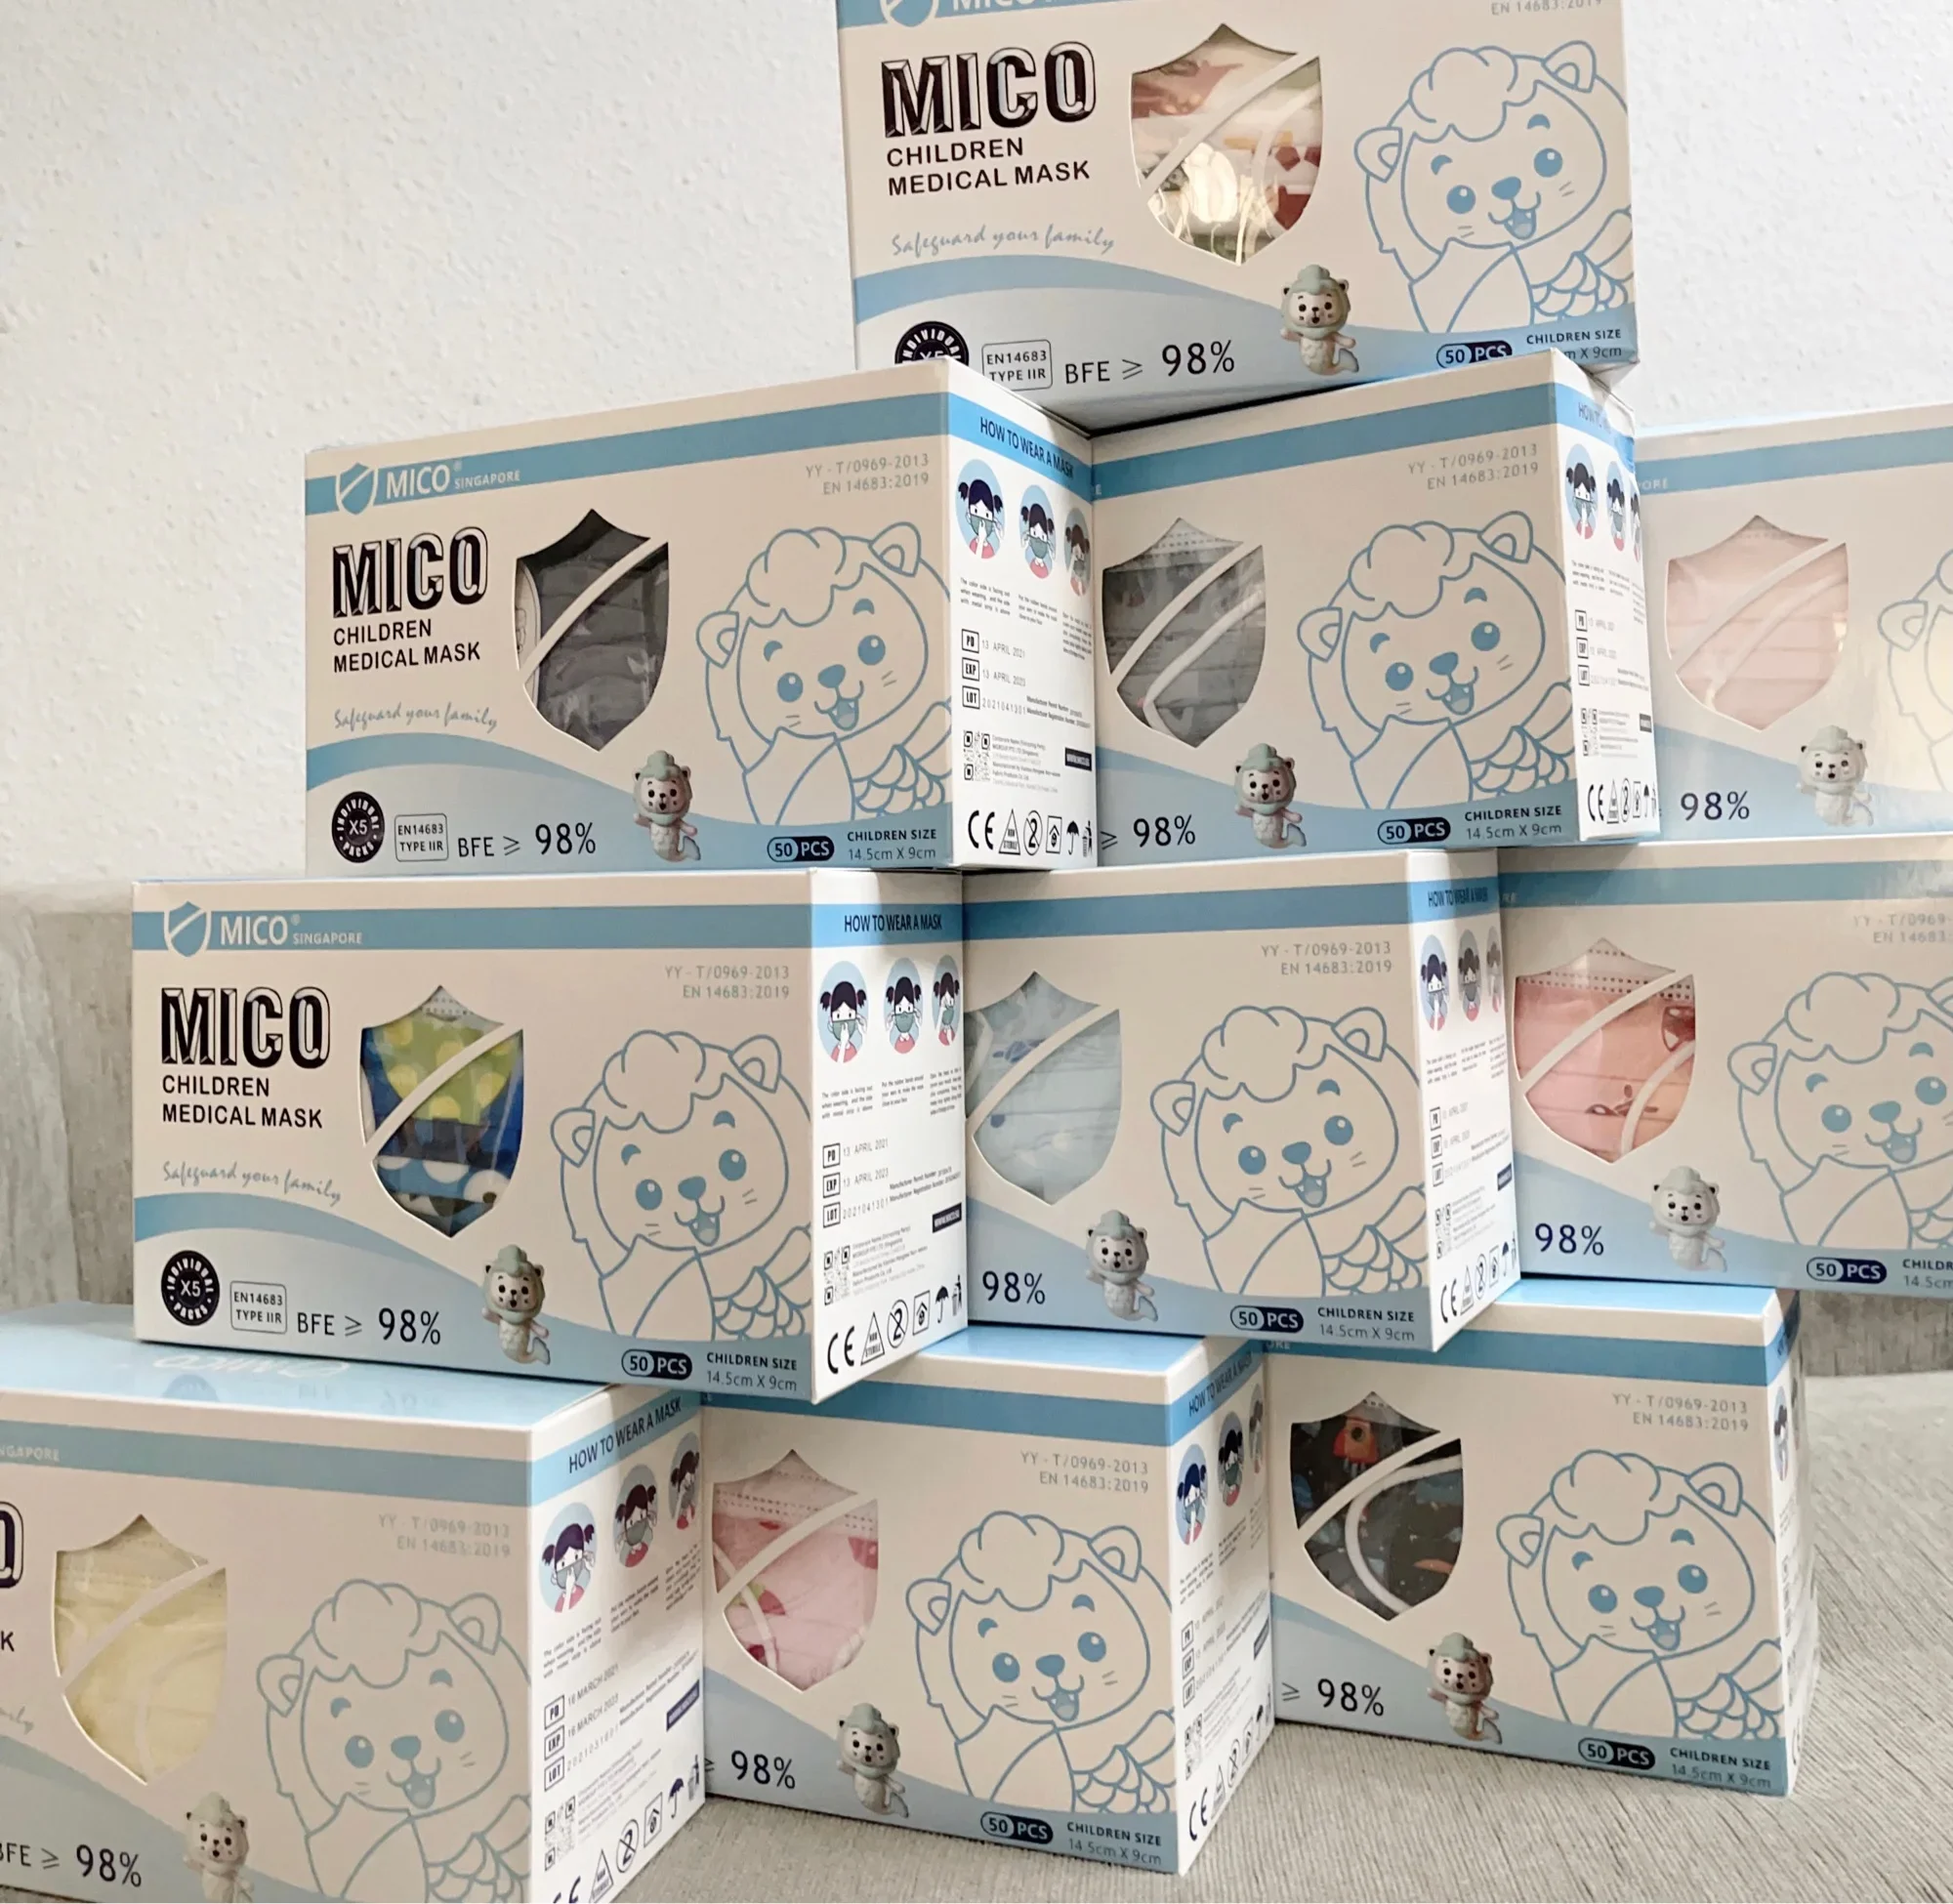 [SG BRAND] MICO Kids Mask 3ply Medical Surgical Mask BFE》98% Disposable Face Mask 50pcs/box